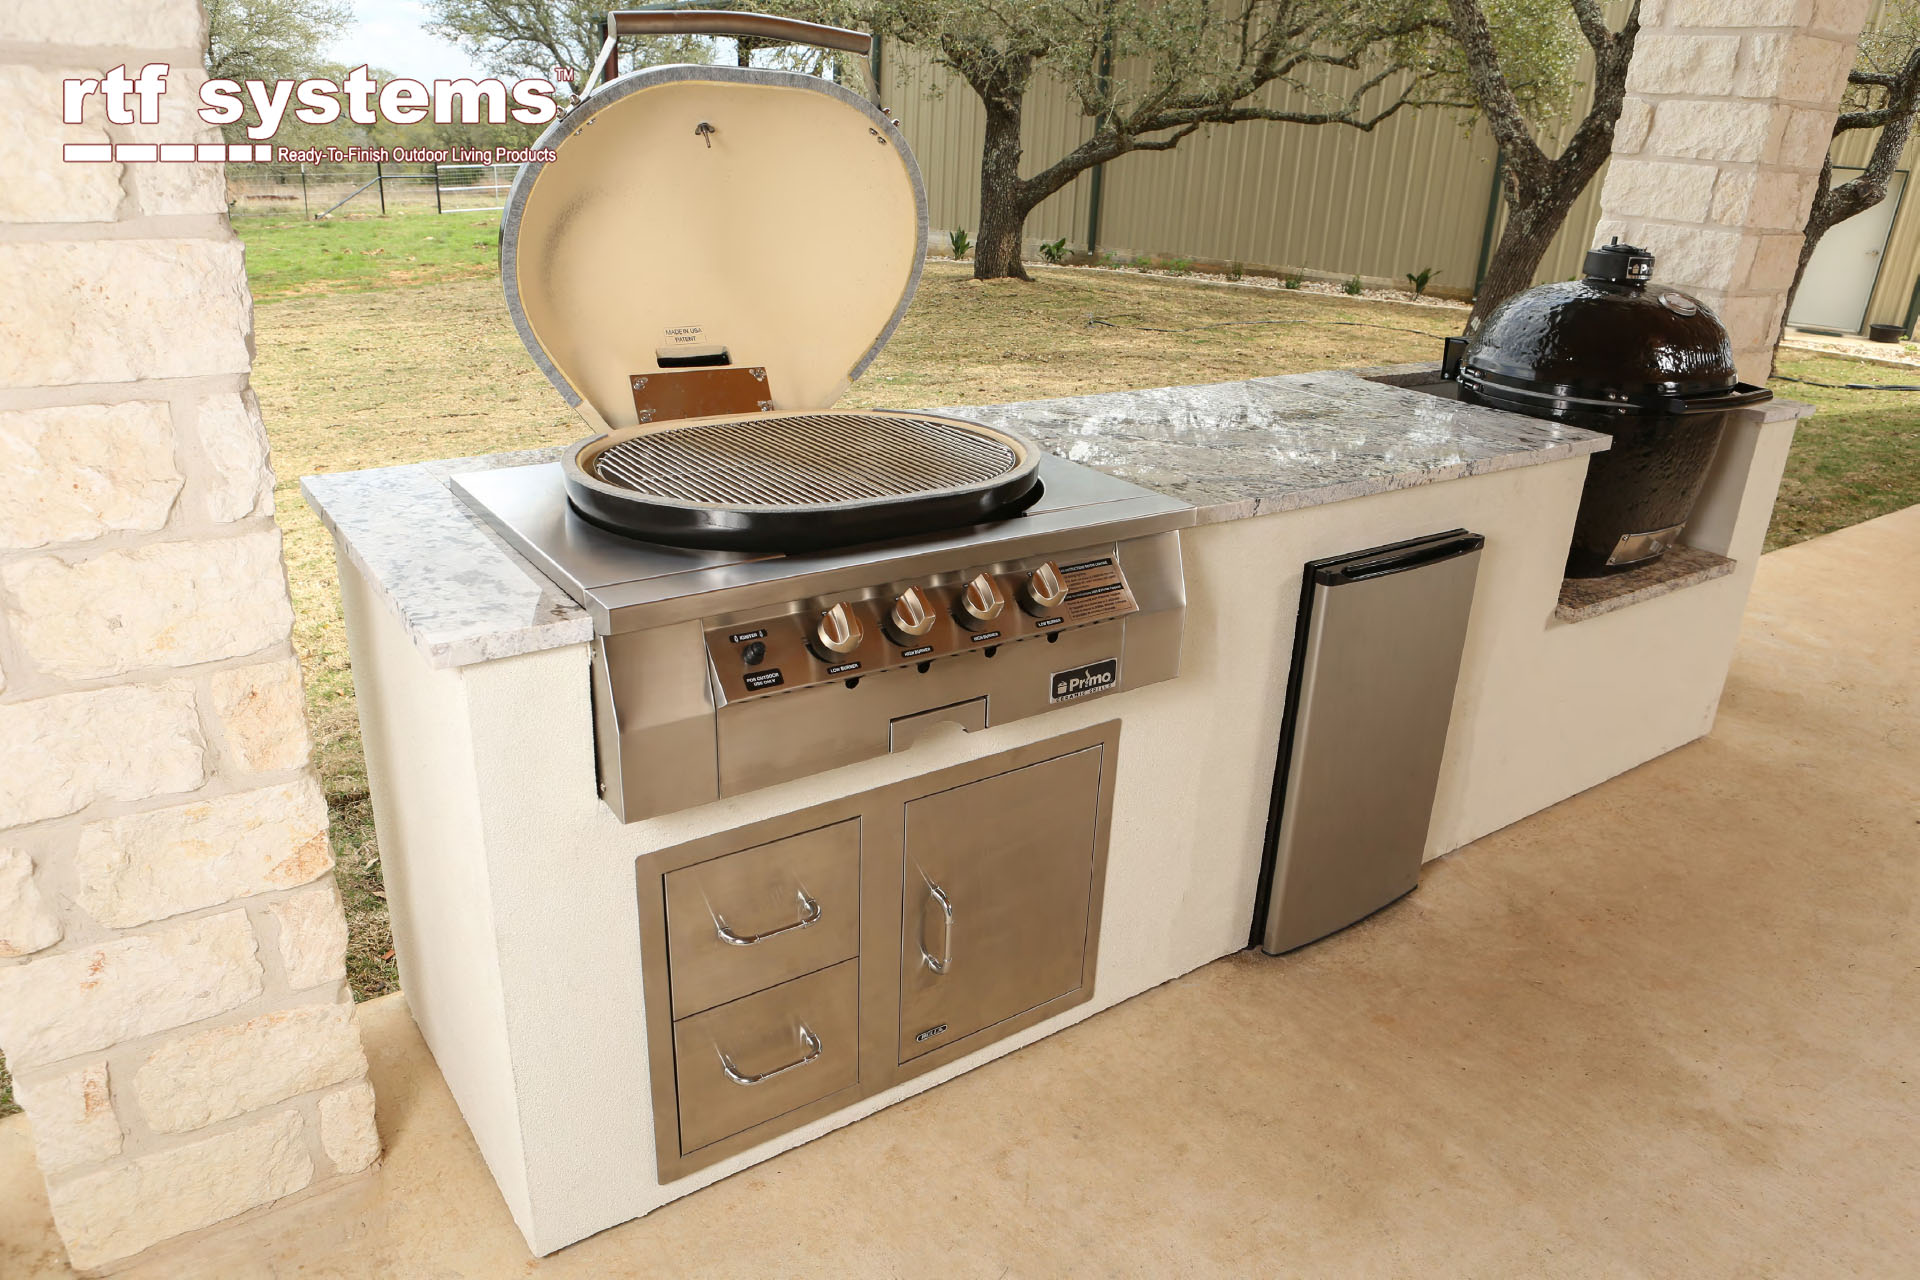 Grills and kitchens